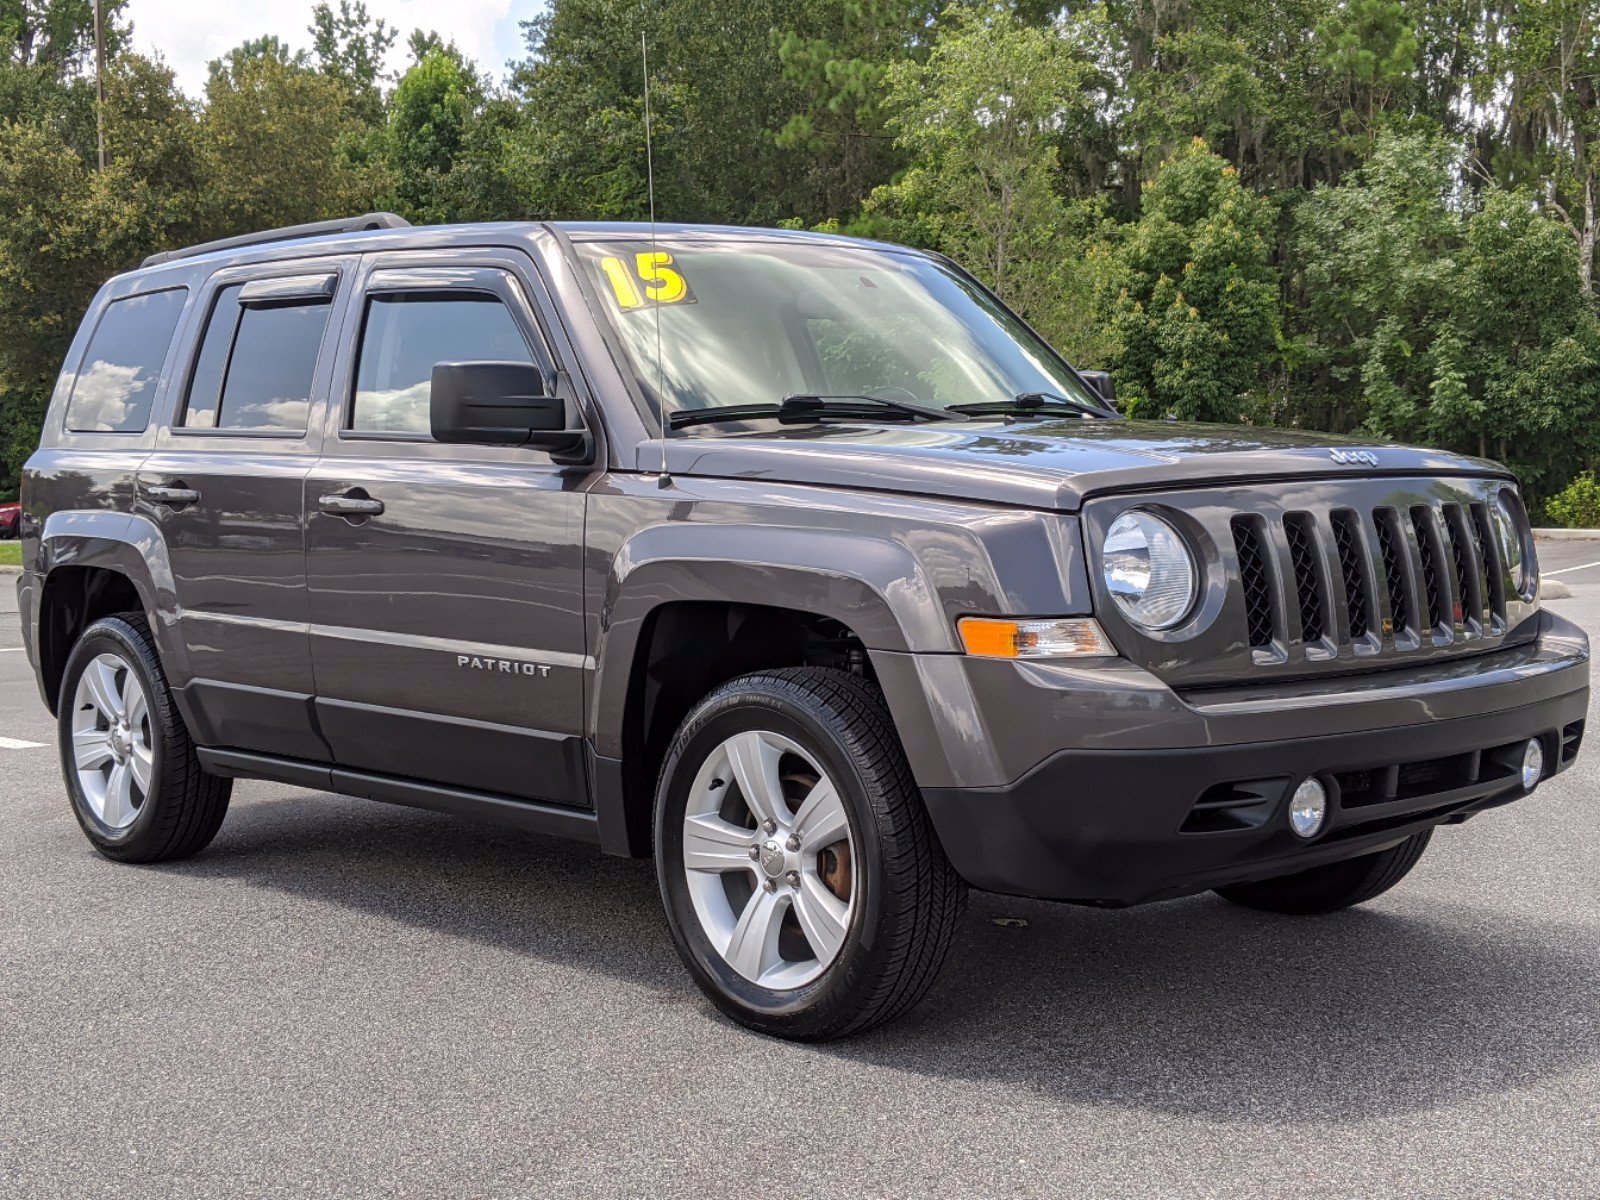 PreOwned 2015 Jeep Patriot Latitude 4D Sport Utility in Ocala 22141A